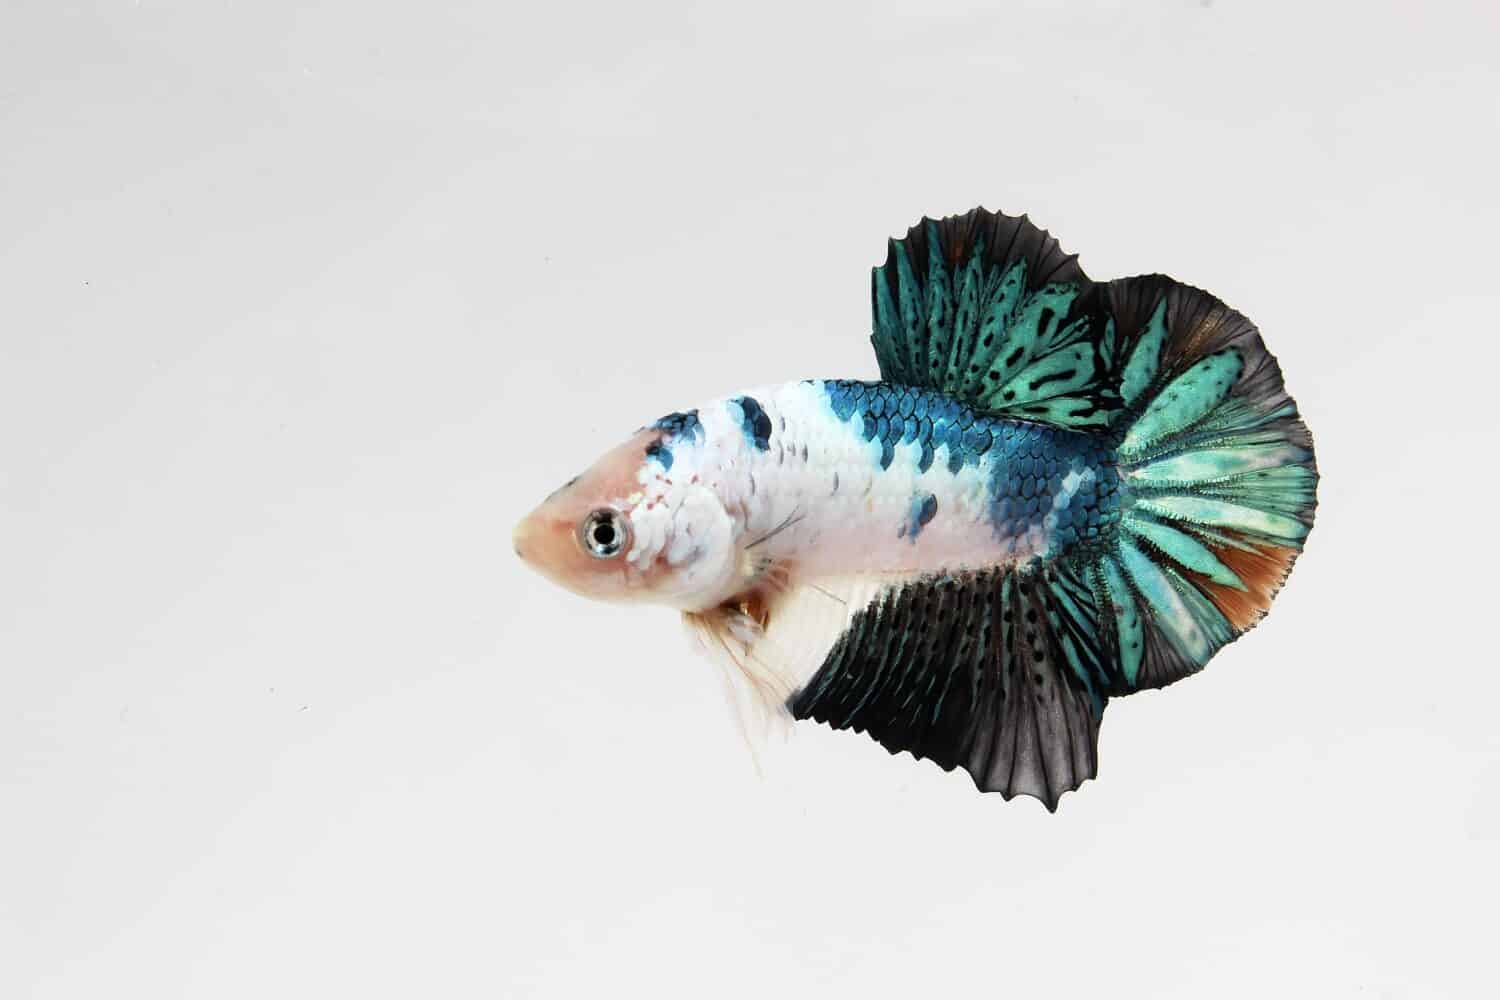 most expensive betta fish